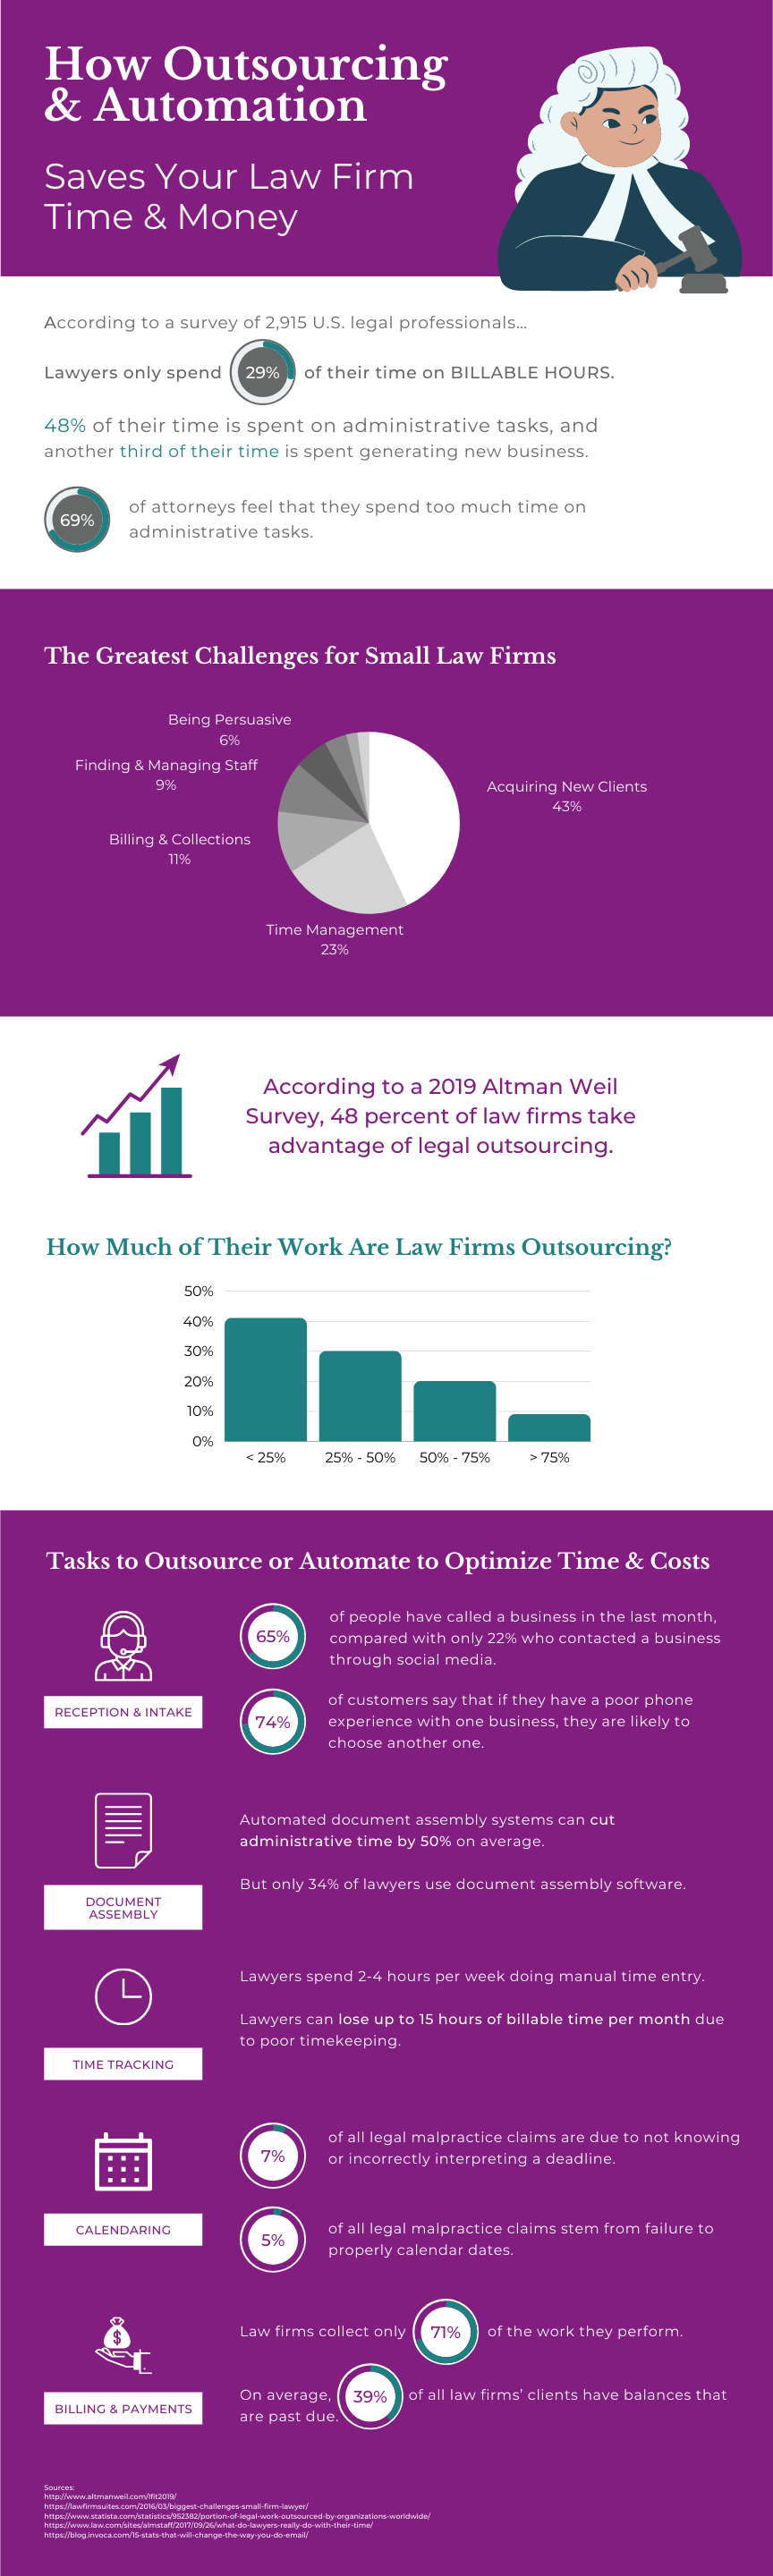 How Outsourcing and Automation Saves Your Law Firm Time and Money